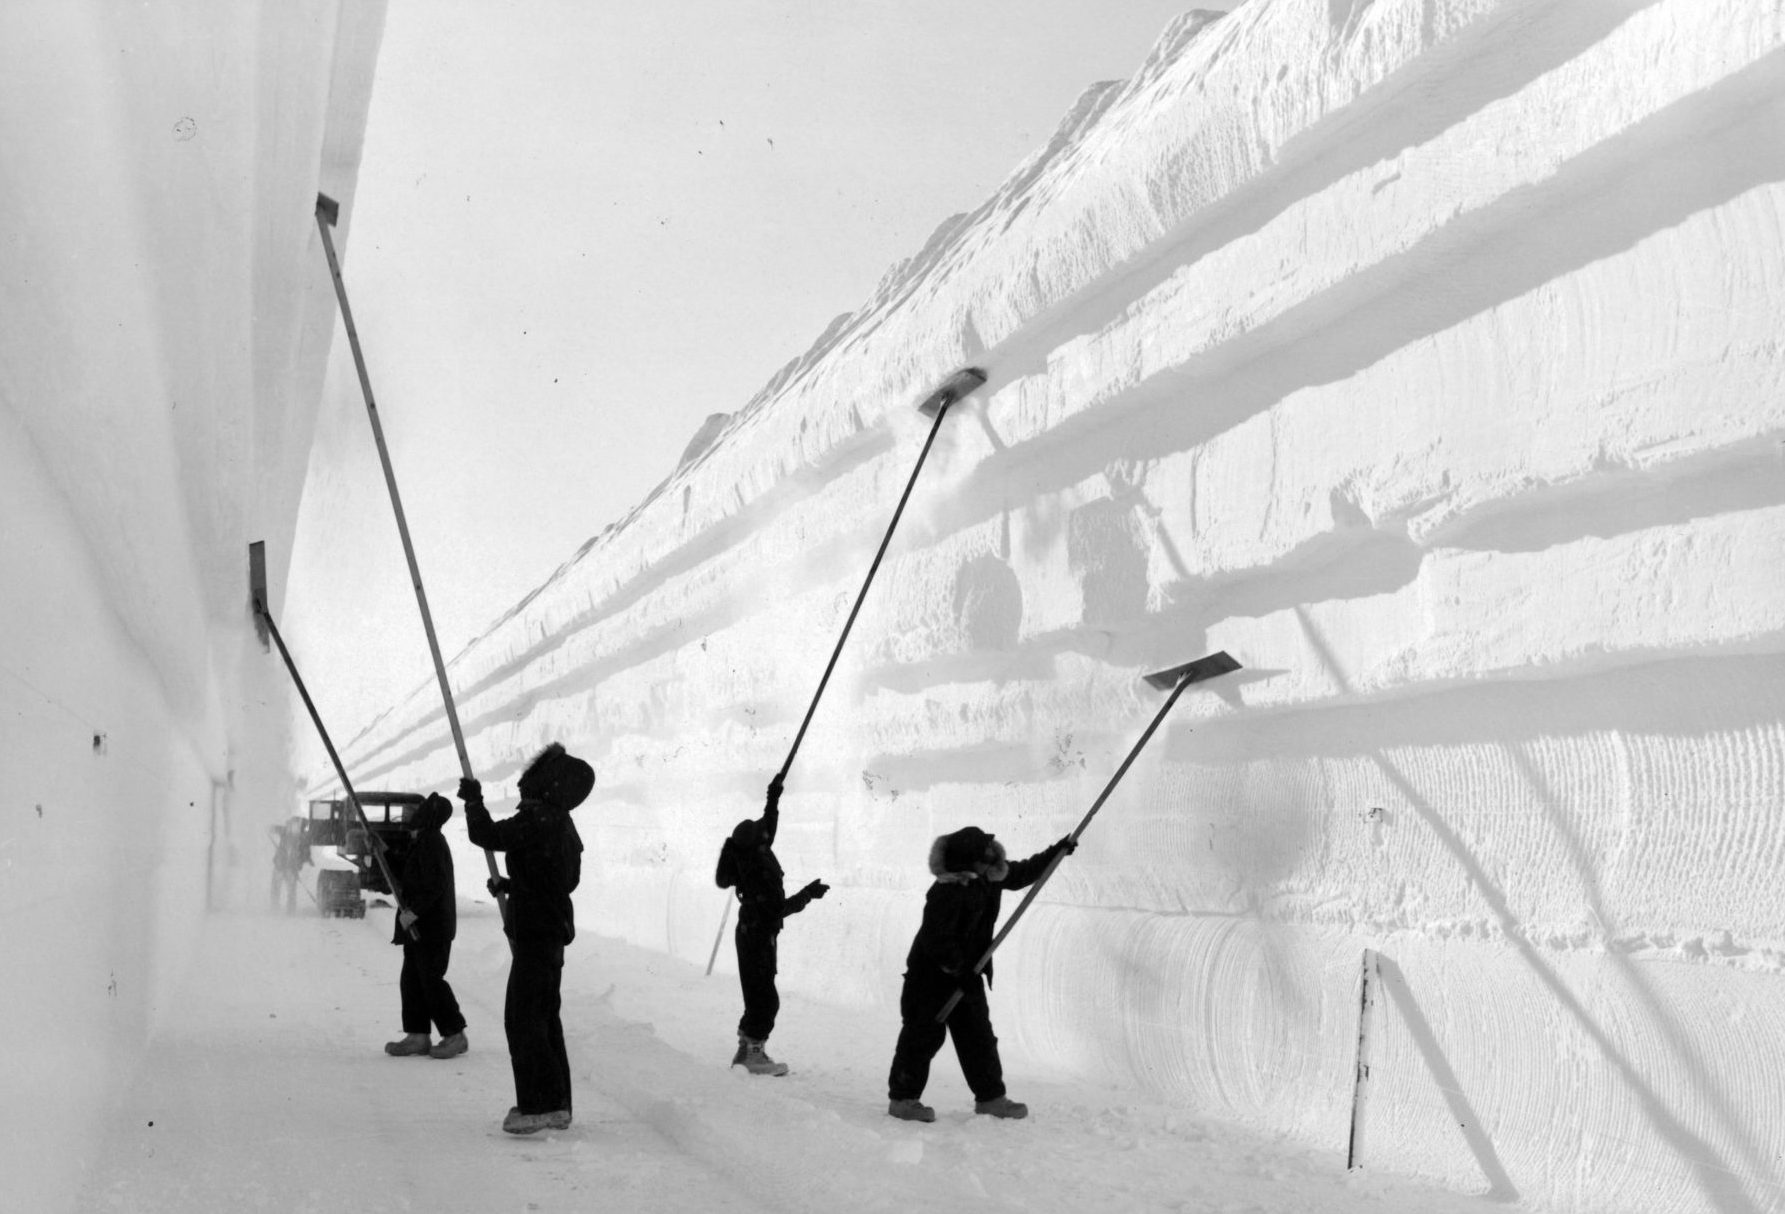 US Navy personnel brush loose snow from the walls of a tunnel leading to a new underground research base in Antarctica in 1960. Photo: Pictorial Parade/Archive.